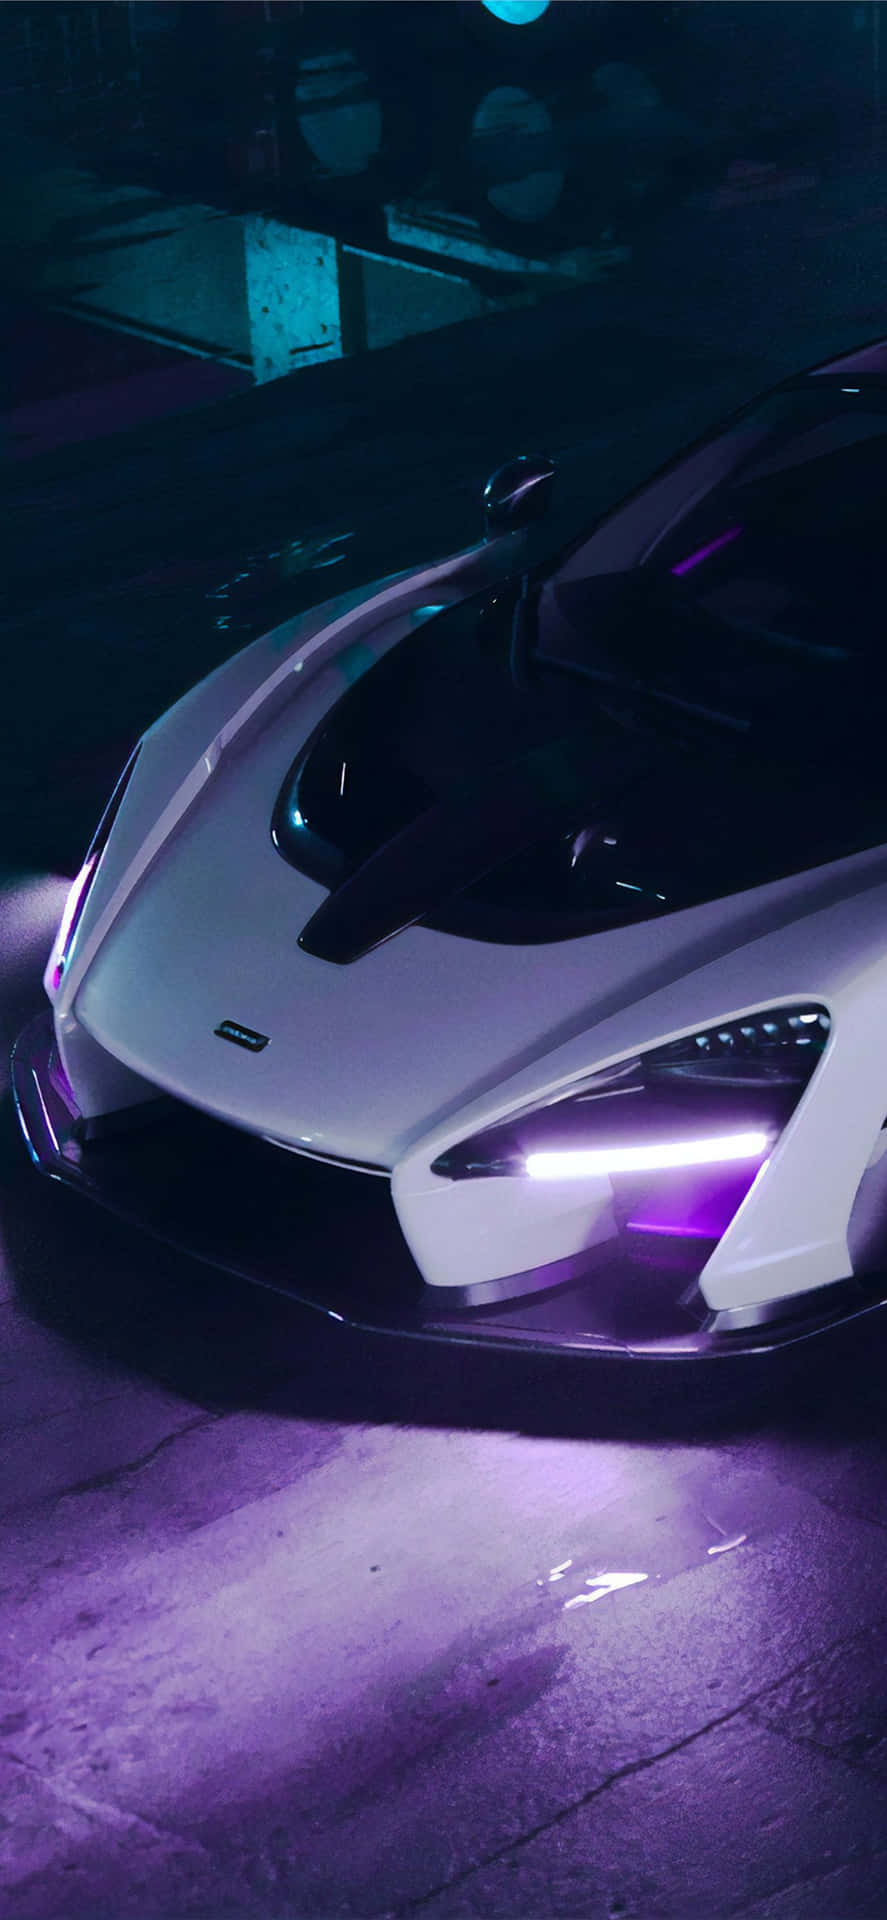 A White Car With Purple Lights In The Background Wallpaper